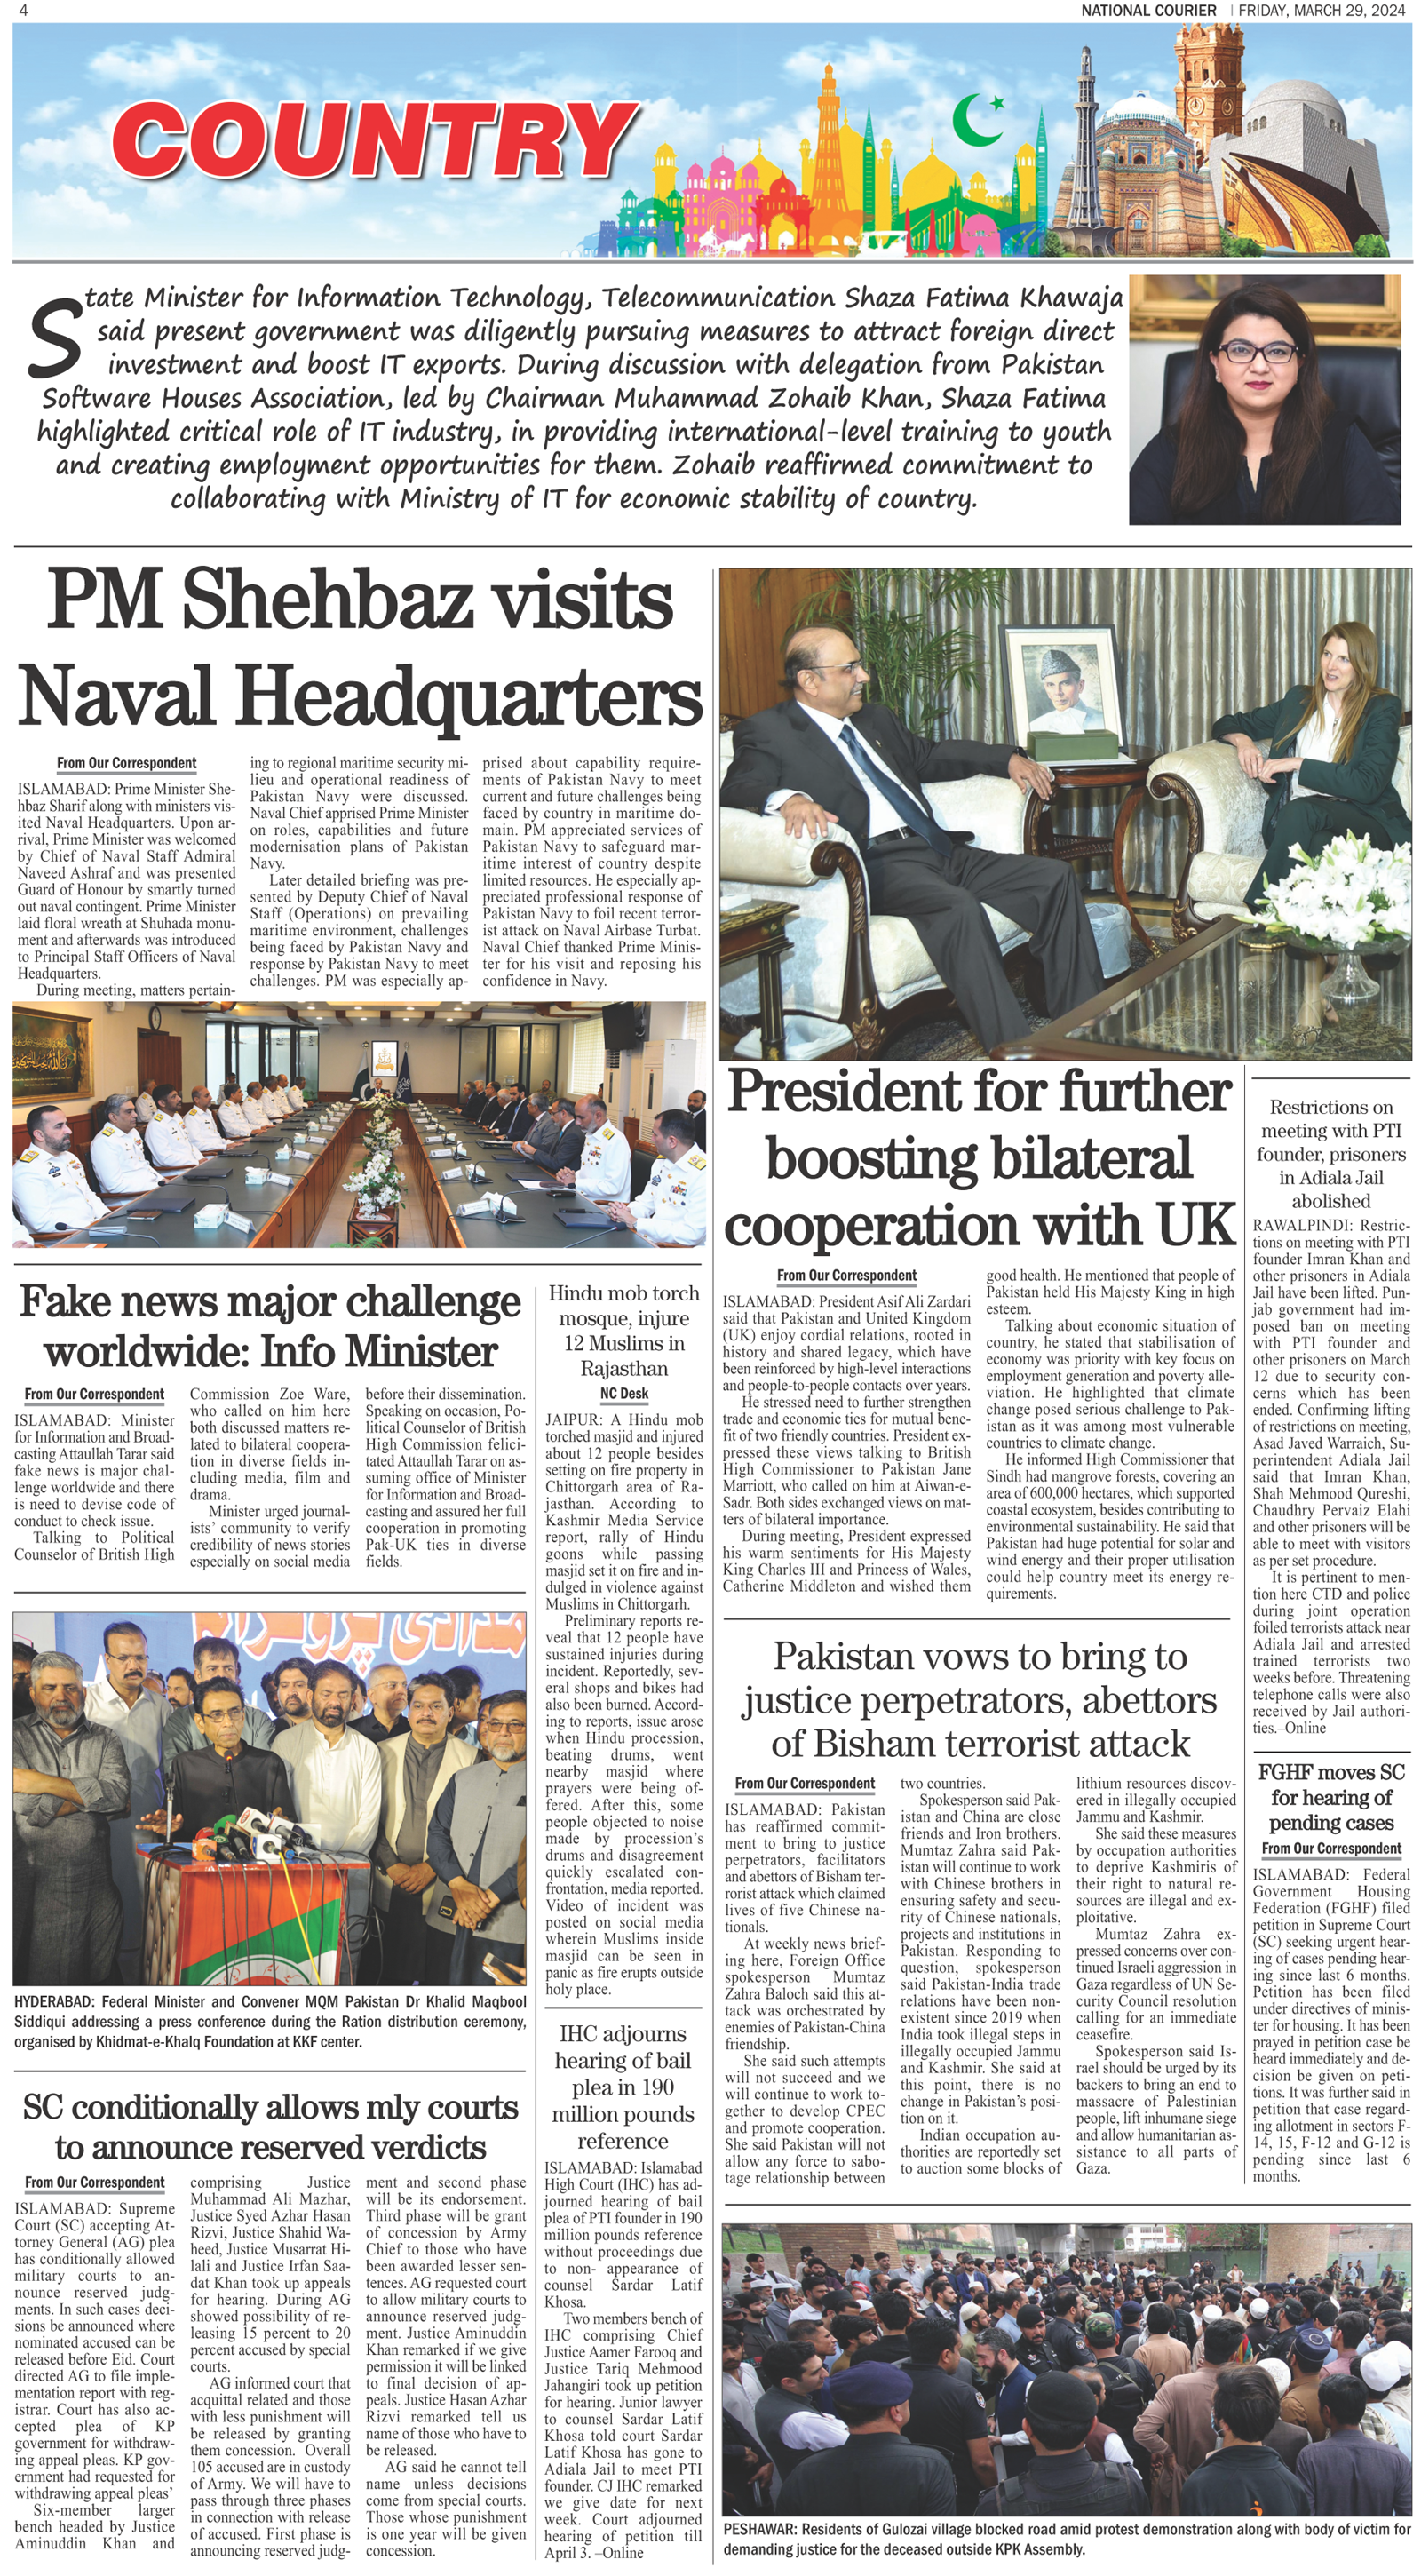 DNC-ePaper | 29 March, 2024 | Country